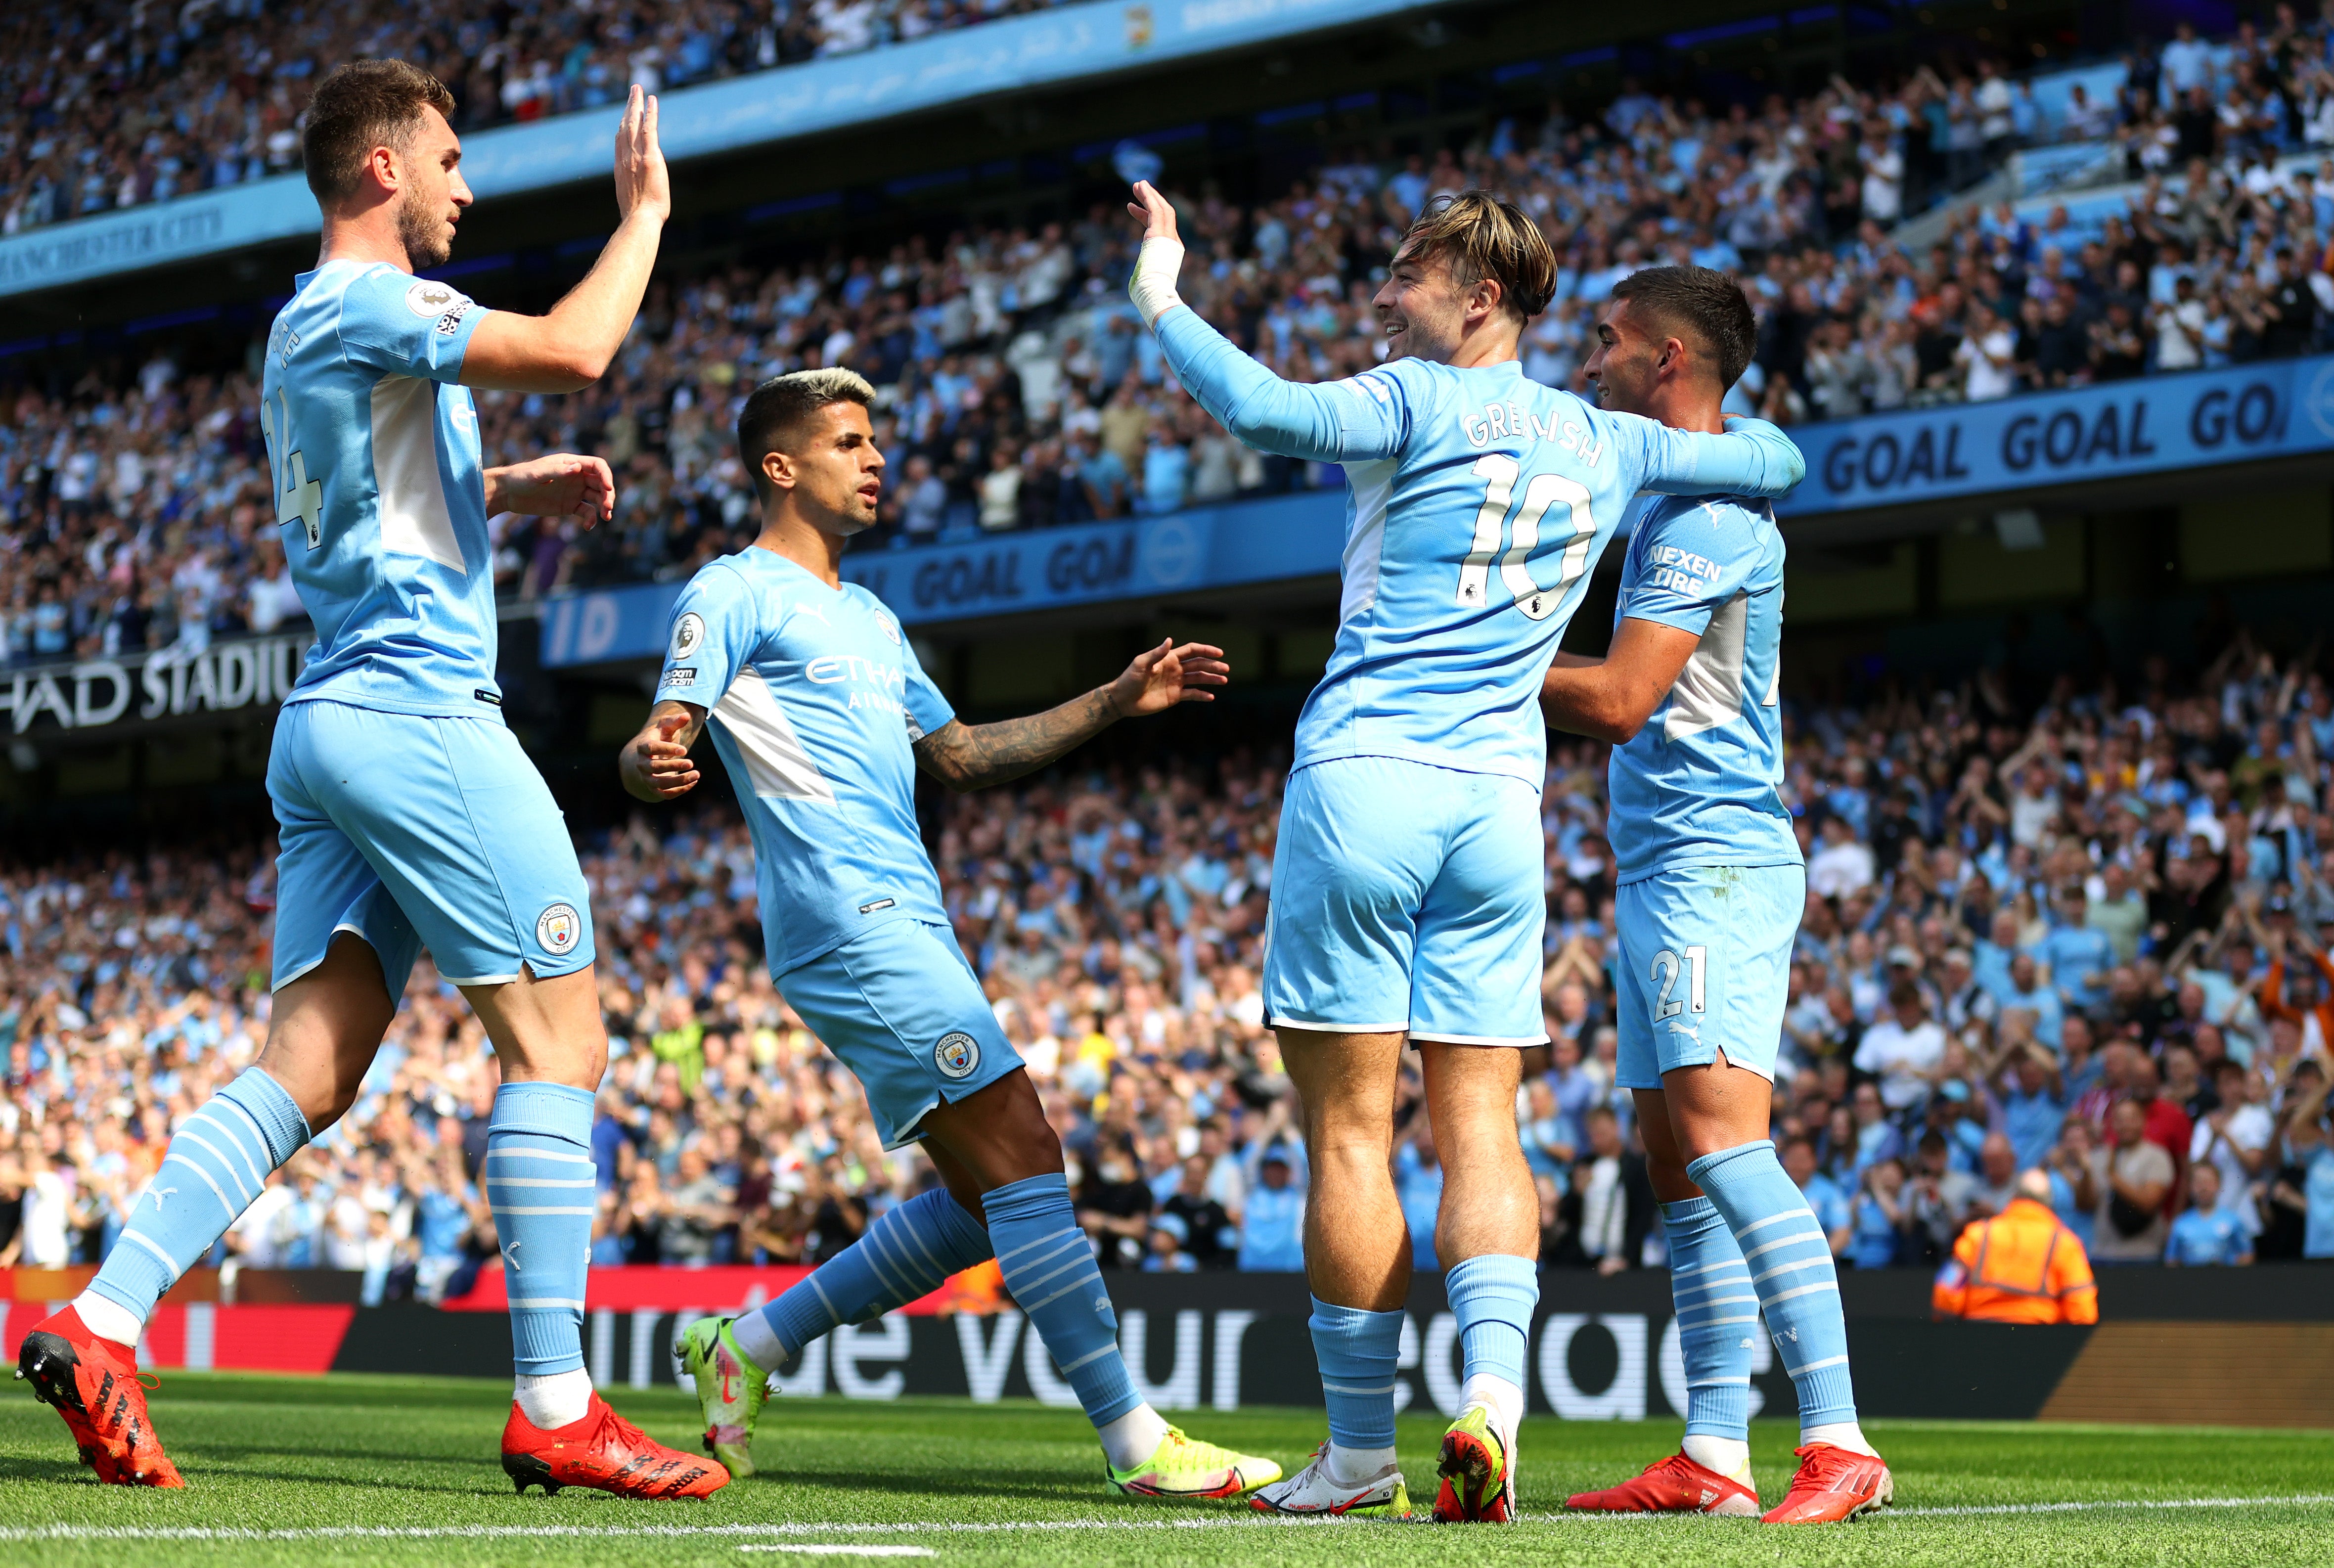 Ferran Torres of Manchester City celebrates with teammates Aymeric Laporte, Joao Cancelo, and Jack Grealish